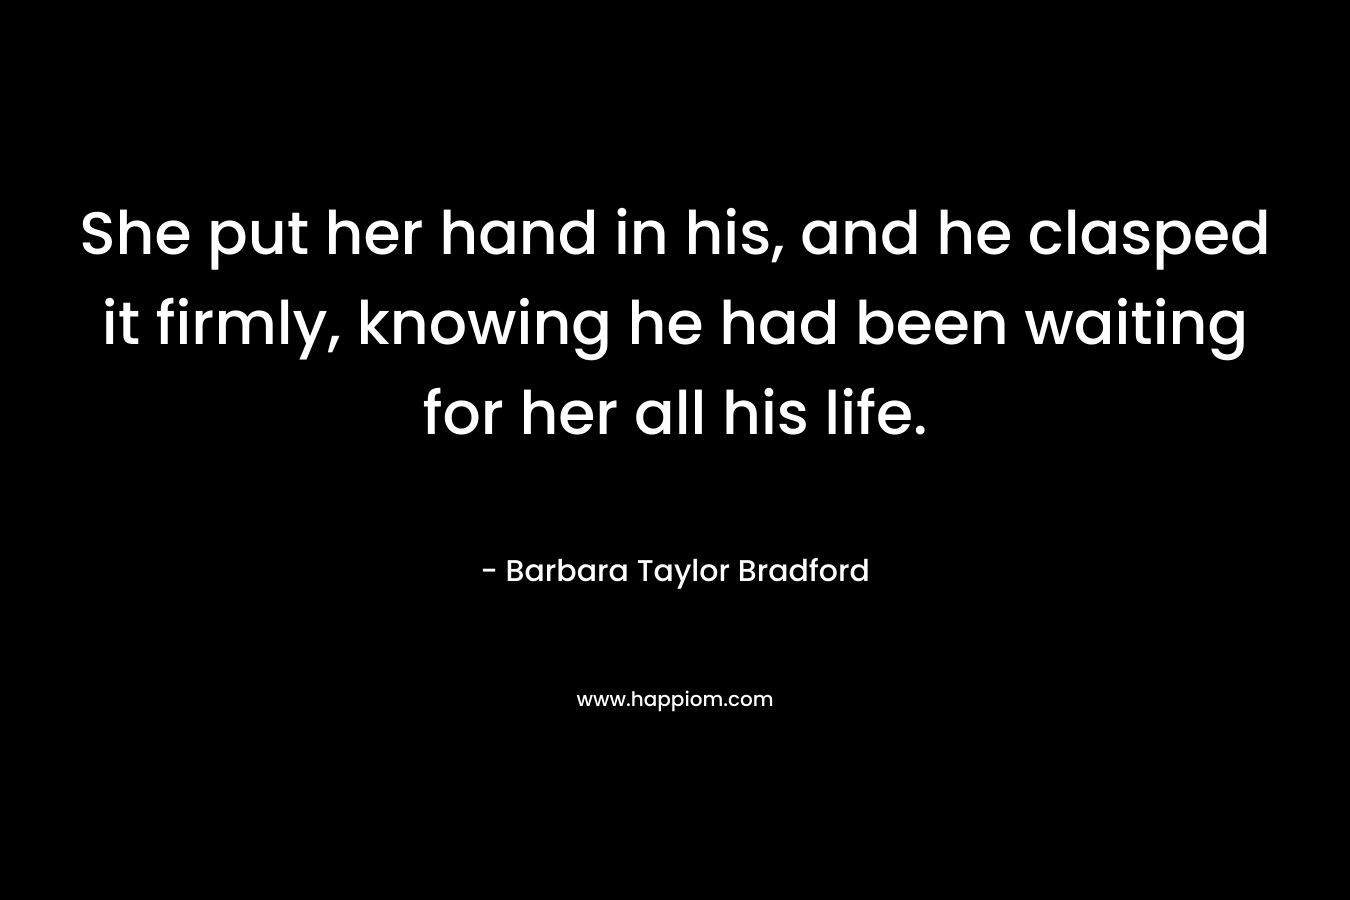 She put her hand in his, and he clasped it firmly, knowing he had been waiting for her all his life. – Barbara Taylor Bradford